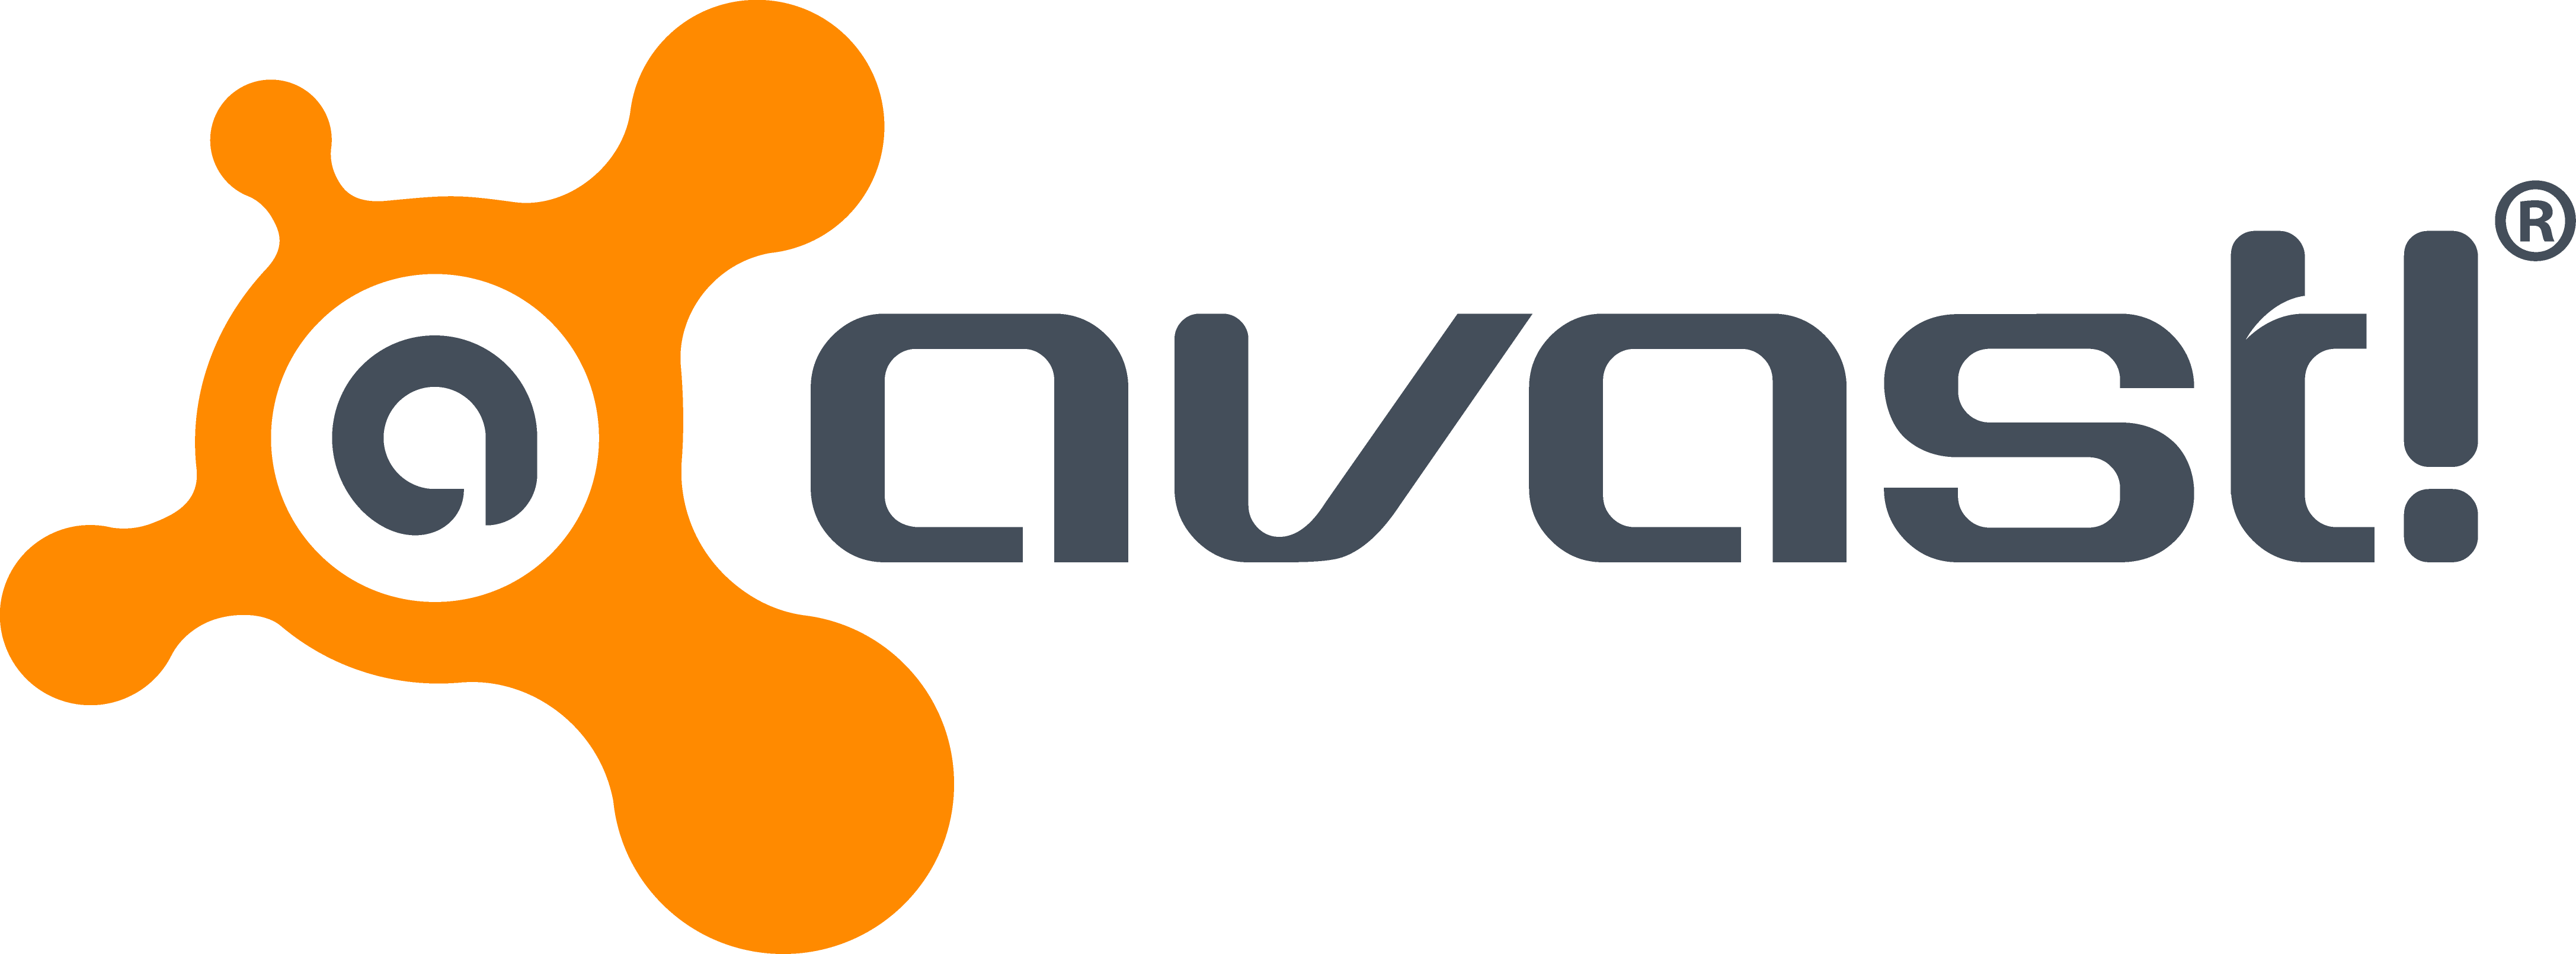 avast online security privacy